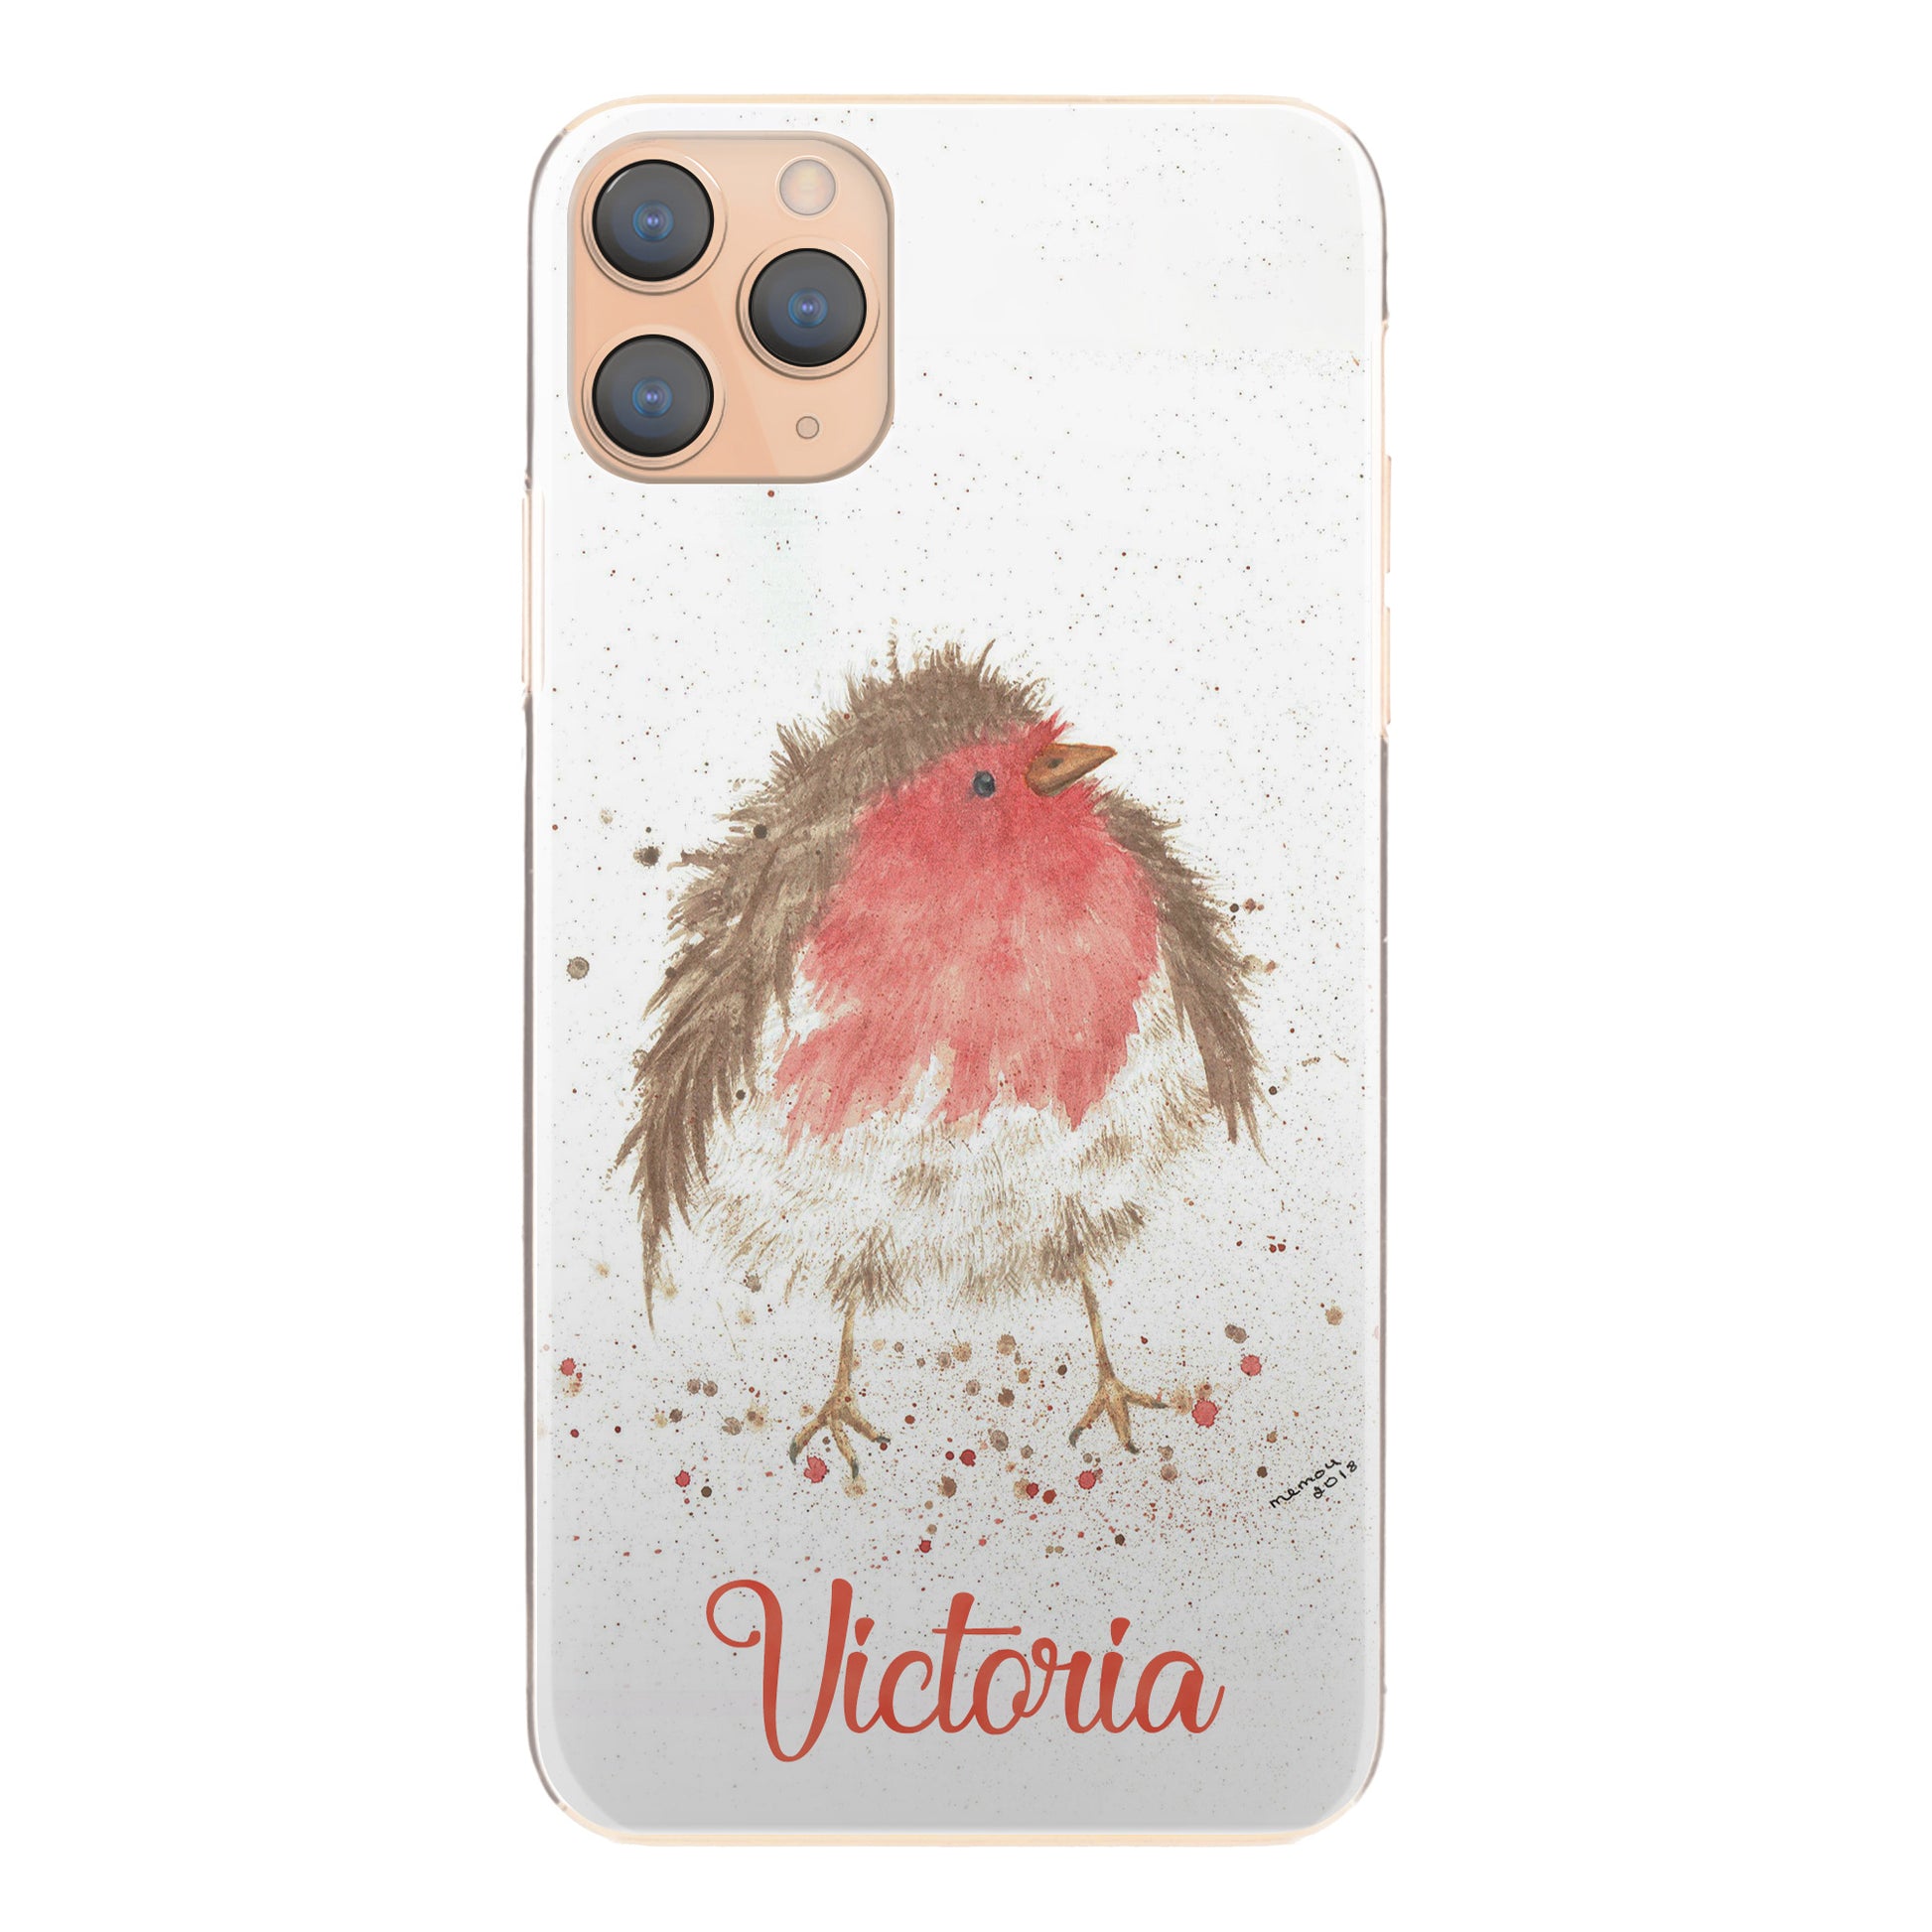 Personalised Nokia Phone Hard Case with Speckled Robin and Red Text